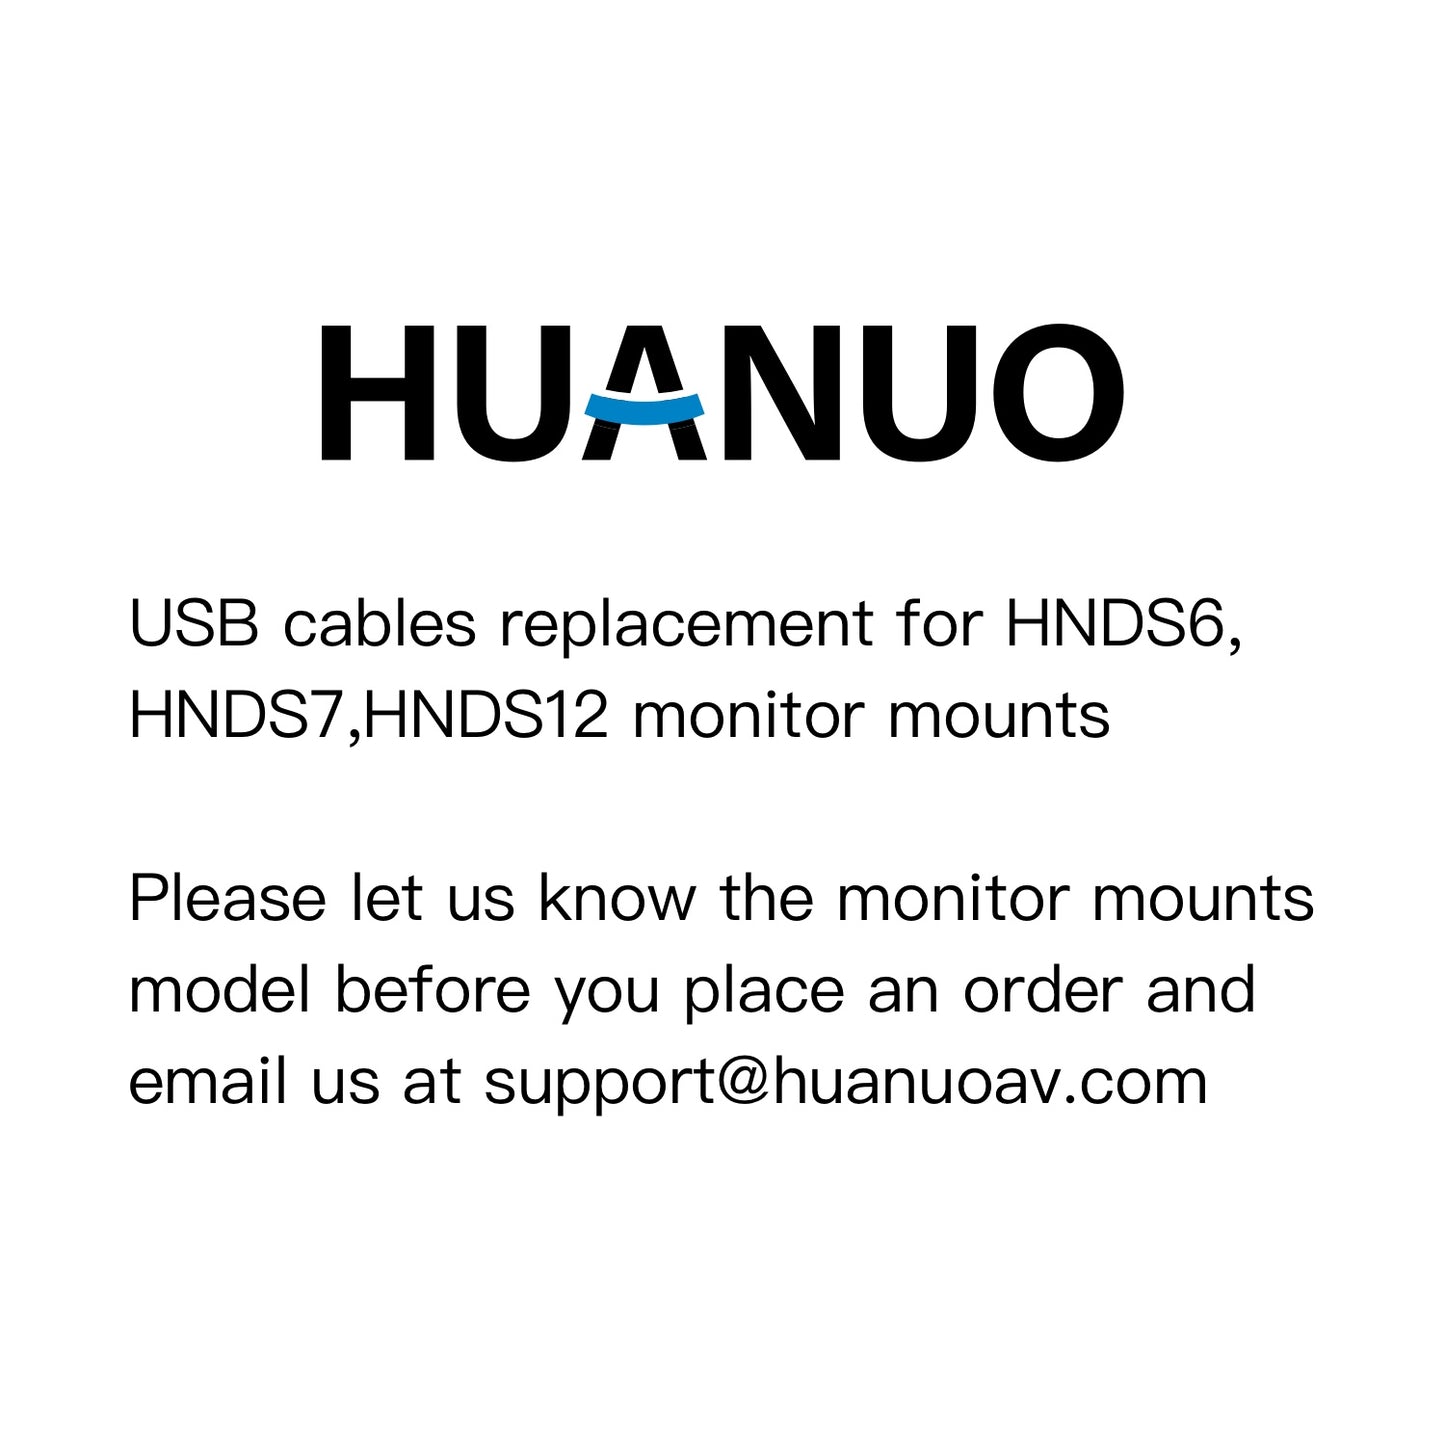 USB cables replacement for HNDS6, HNDS7, HNDS12 monitor mounts